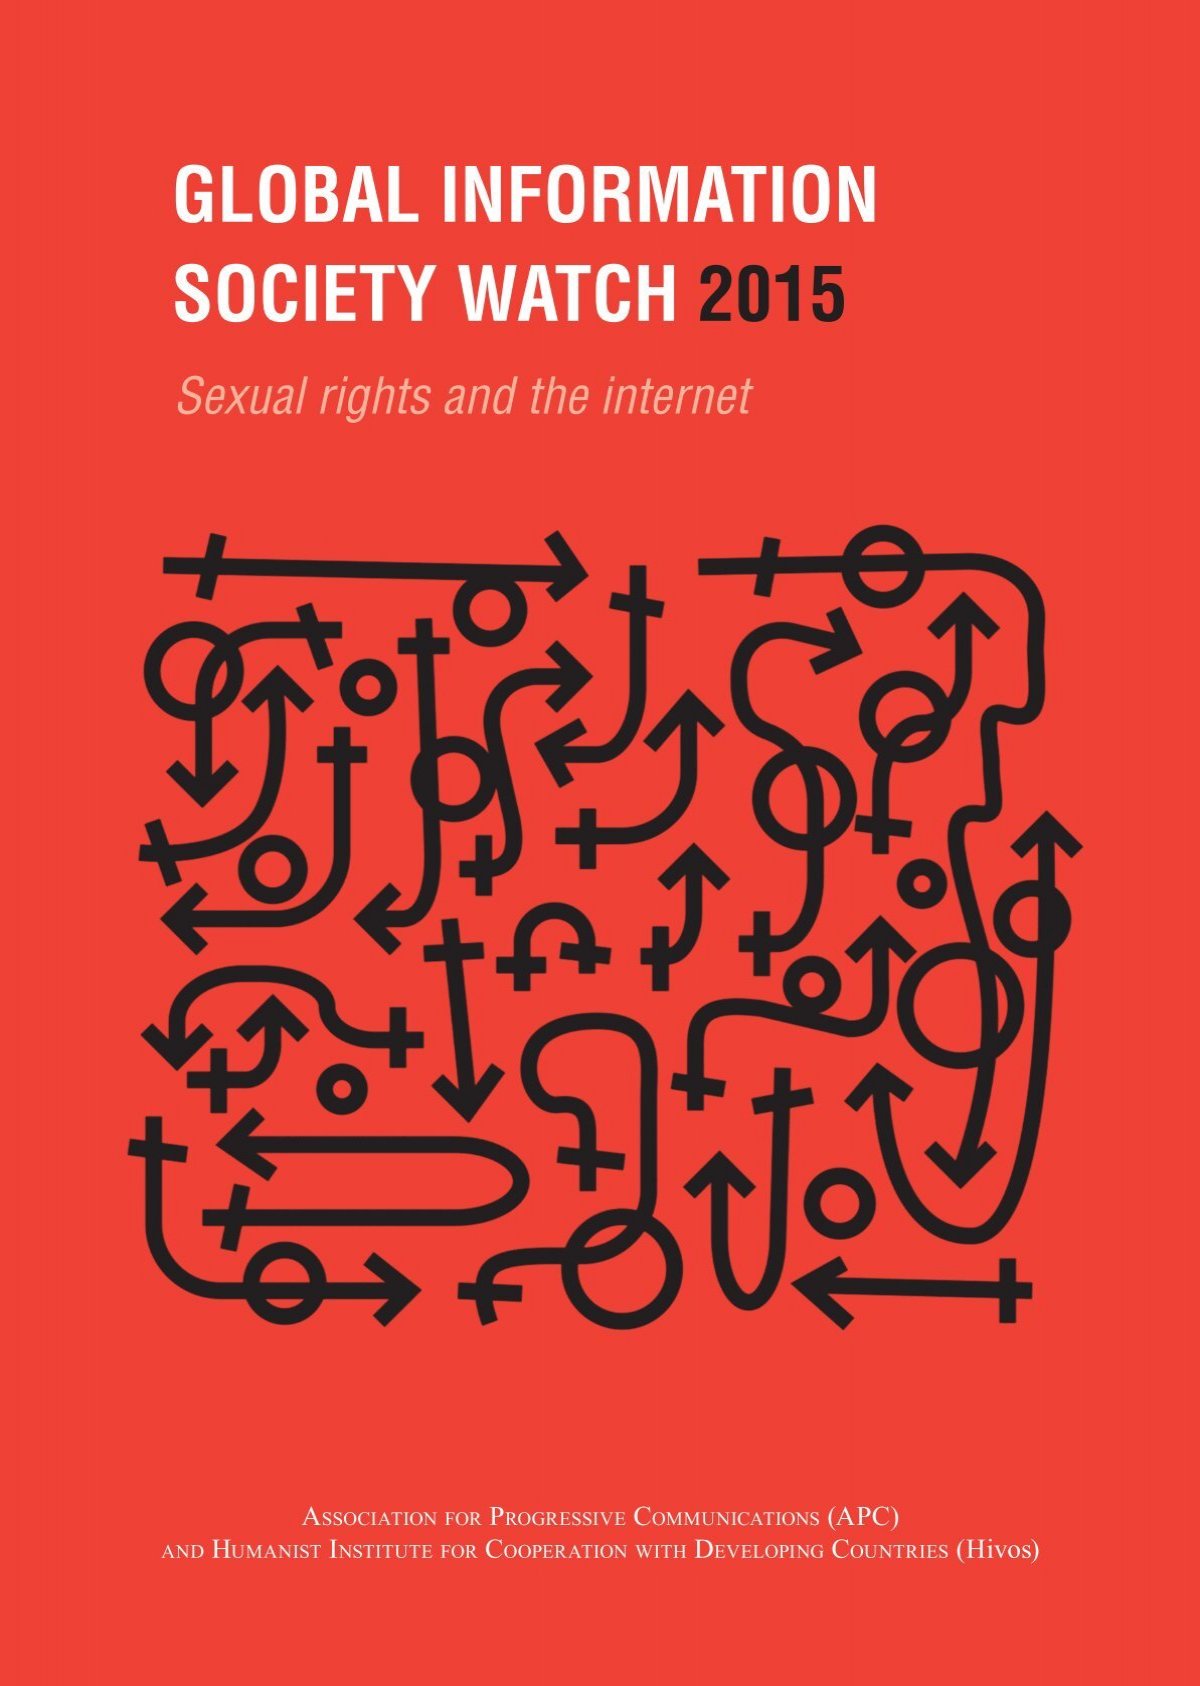 Global Information Society Watch 2015 pic